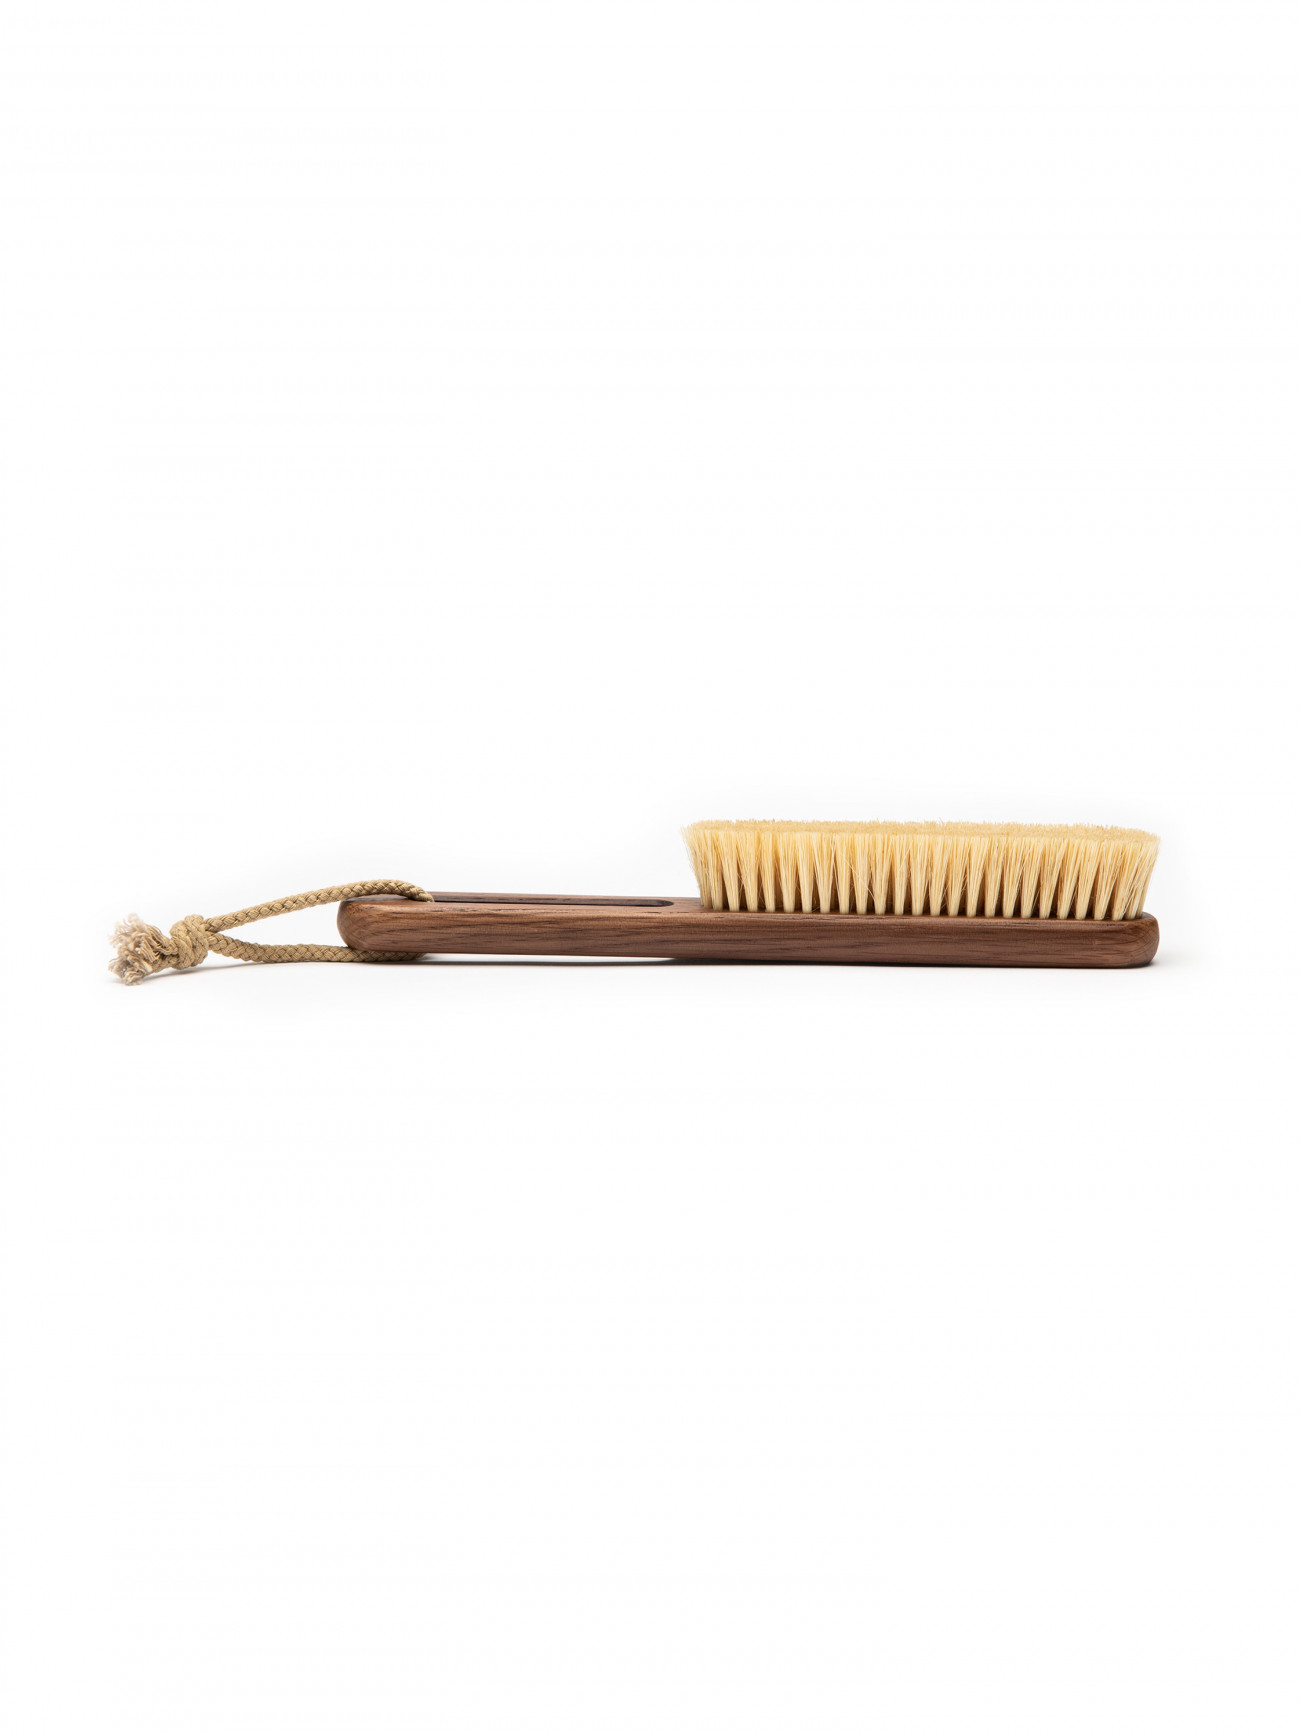 Steamery Clothing Brush. Side view.